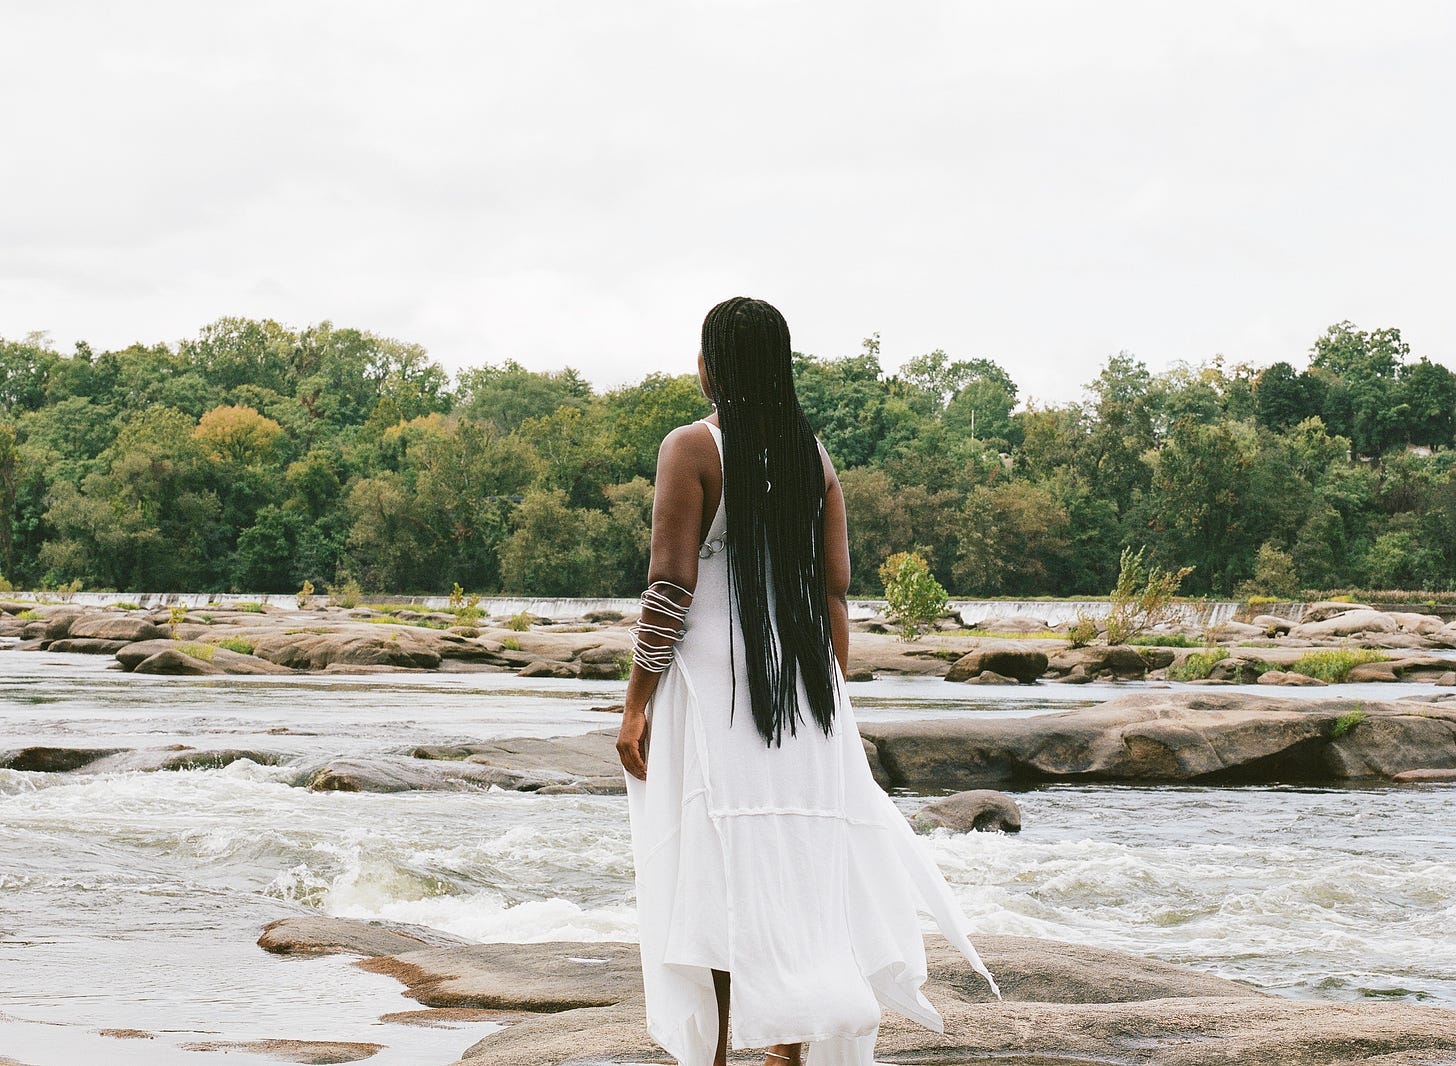 A black woman (me) with braids wearing a white dress, back facing the camera while standing on top of river rocks with a tree line in the background.